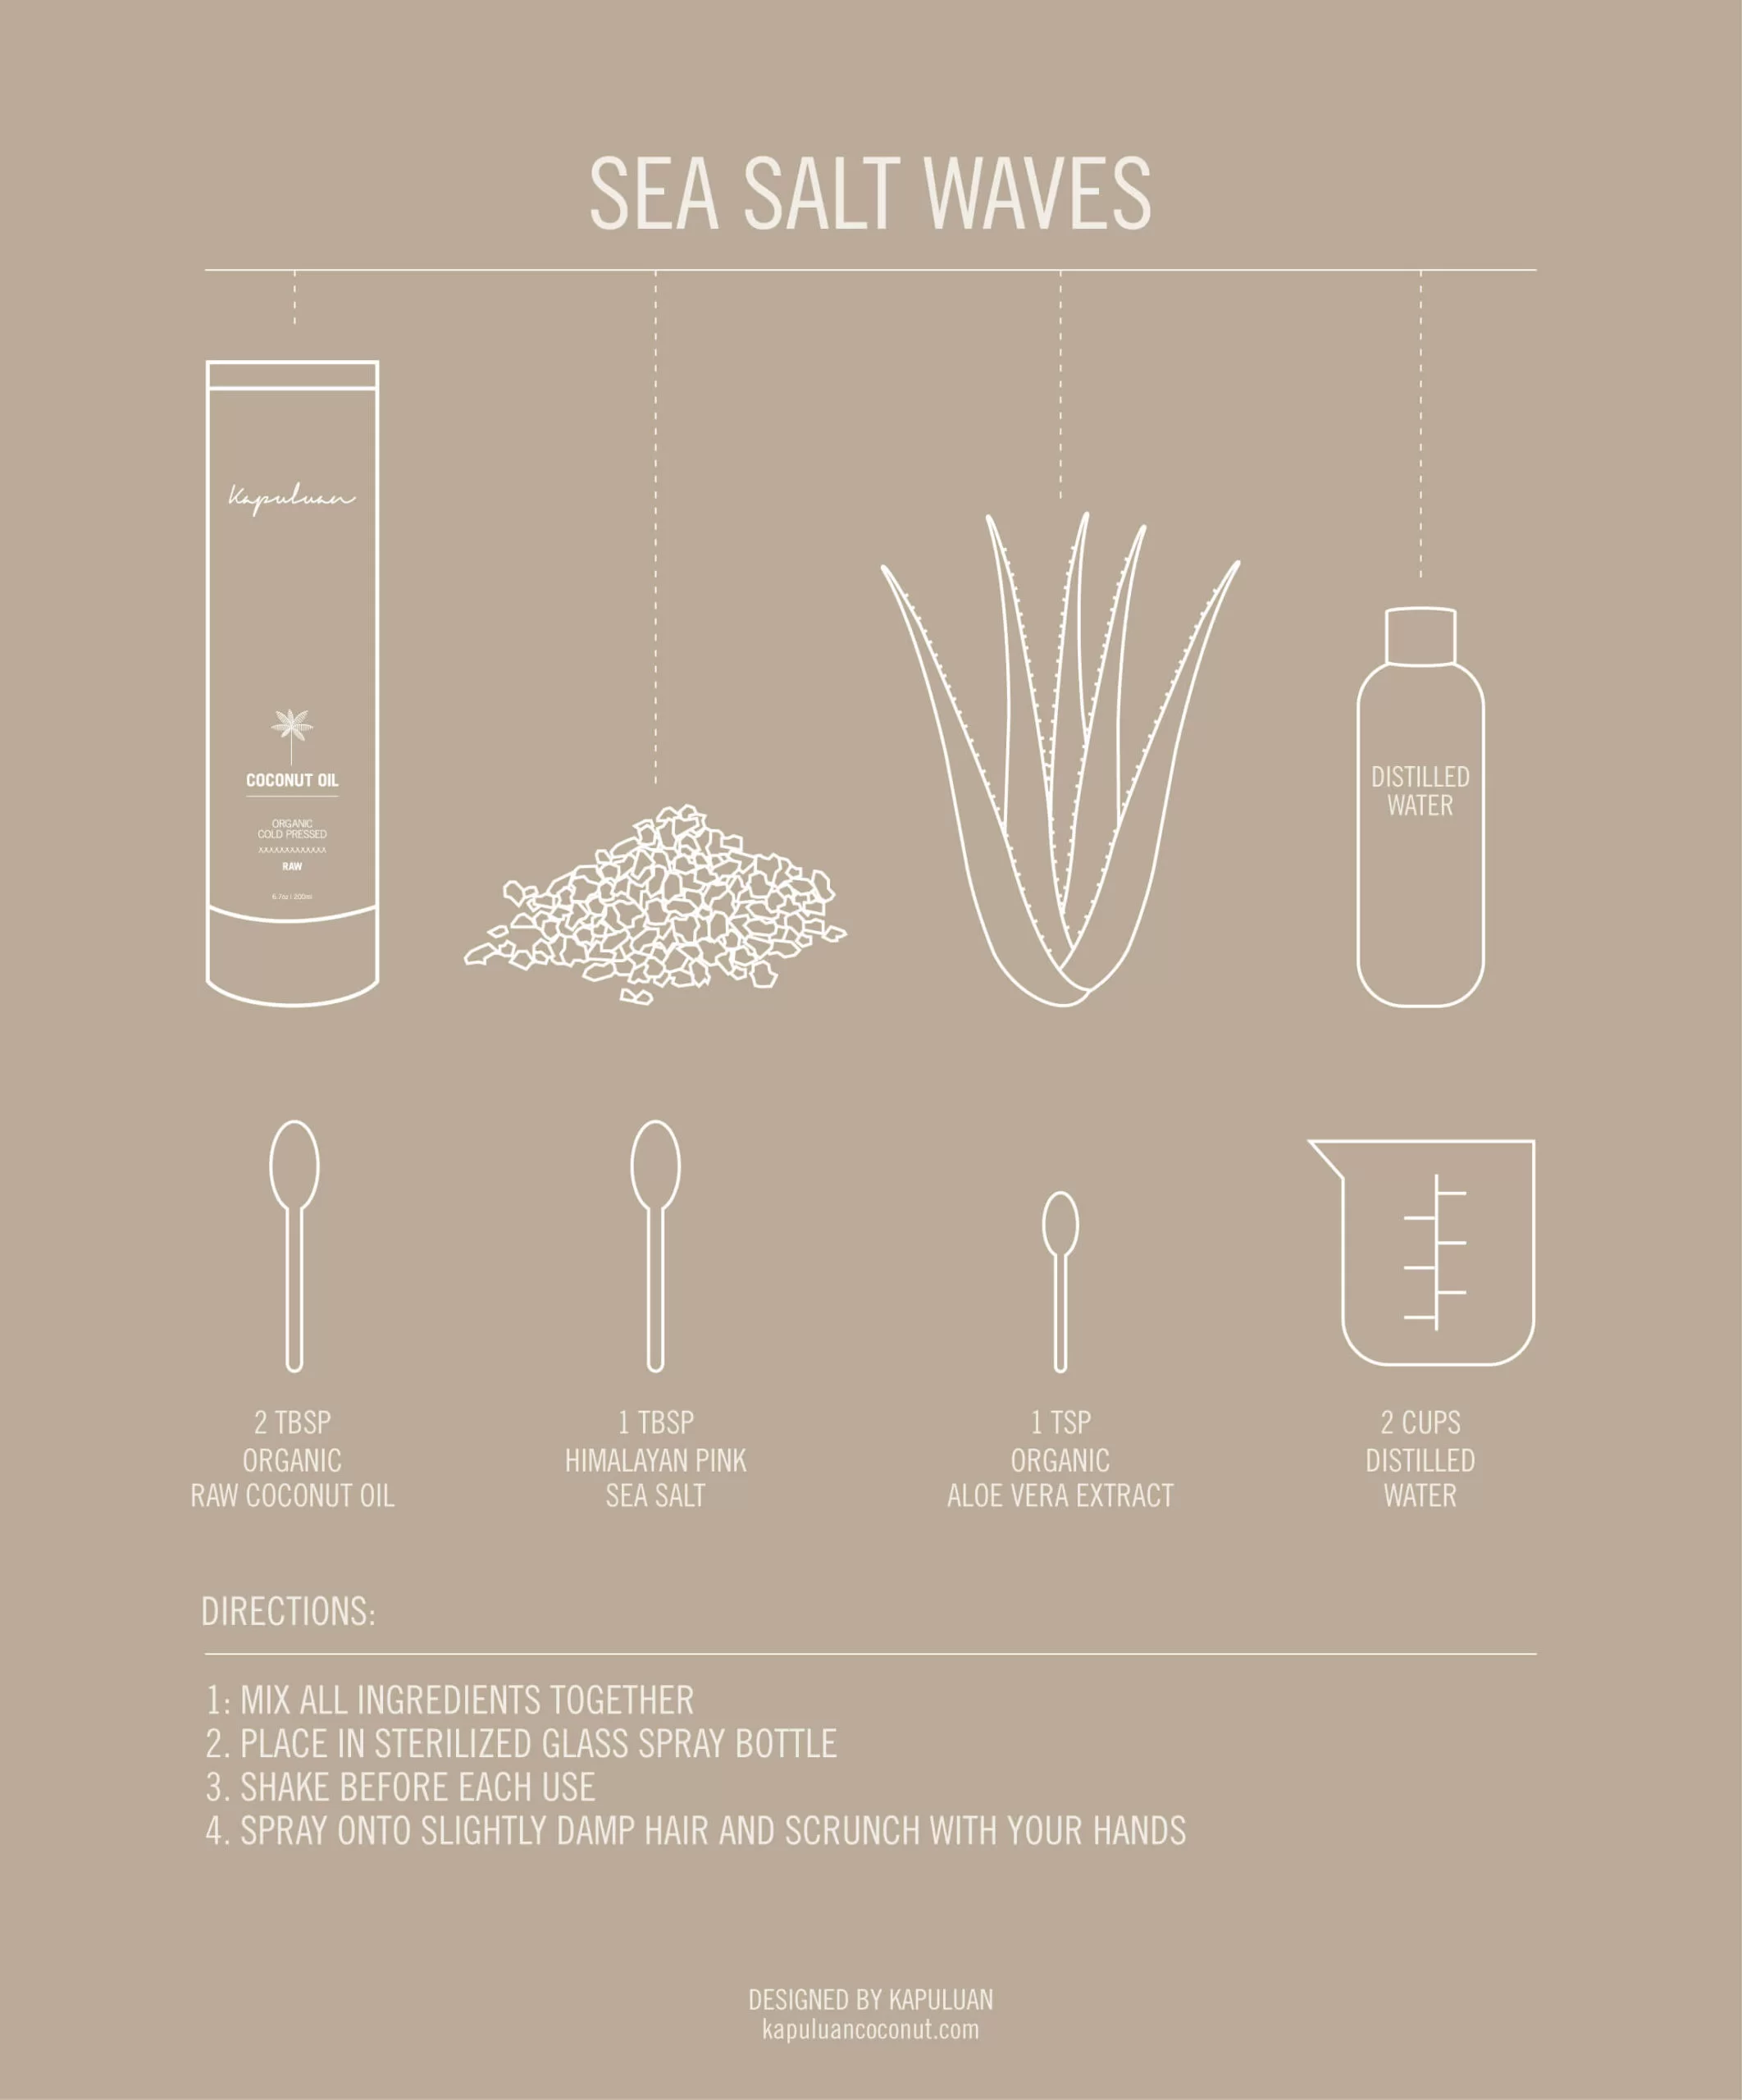 Illustration showing a recipe for "sea salt waves" hair spray, including labeled icons of ingredients and instructions, in a minimalistic, line-drawing style on a neutral background.